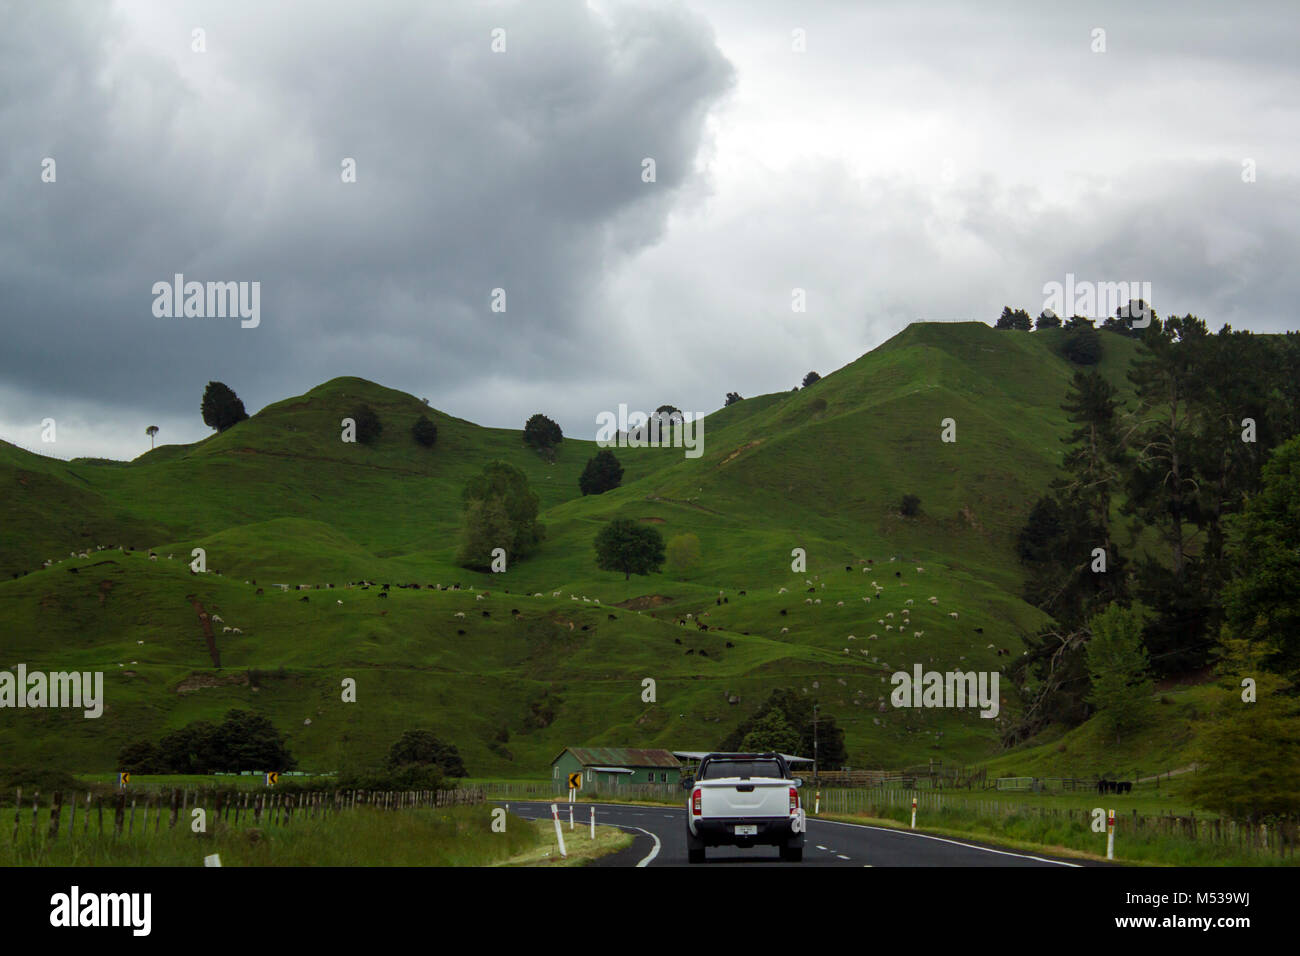 Car driving through beautiful road surronded by vibrant rolling green hills Stock Photo